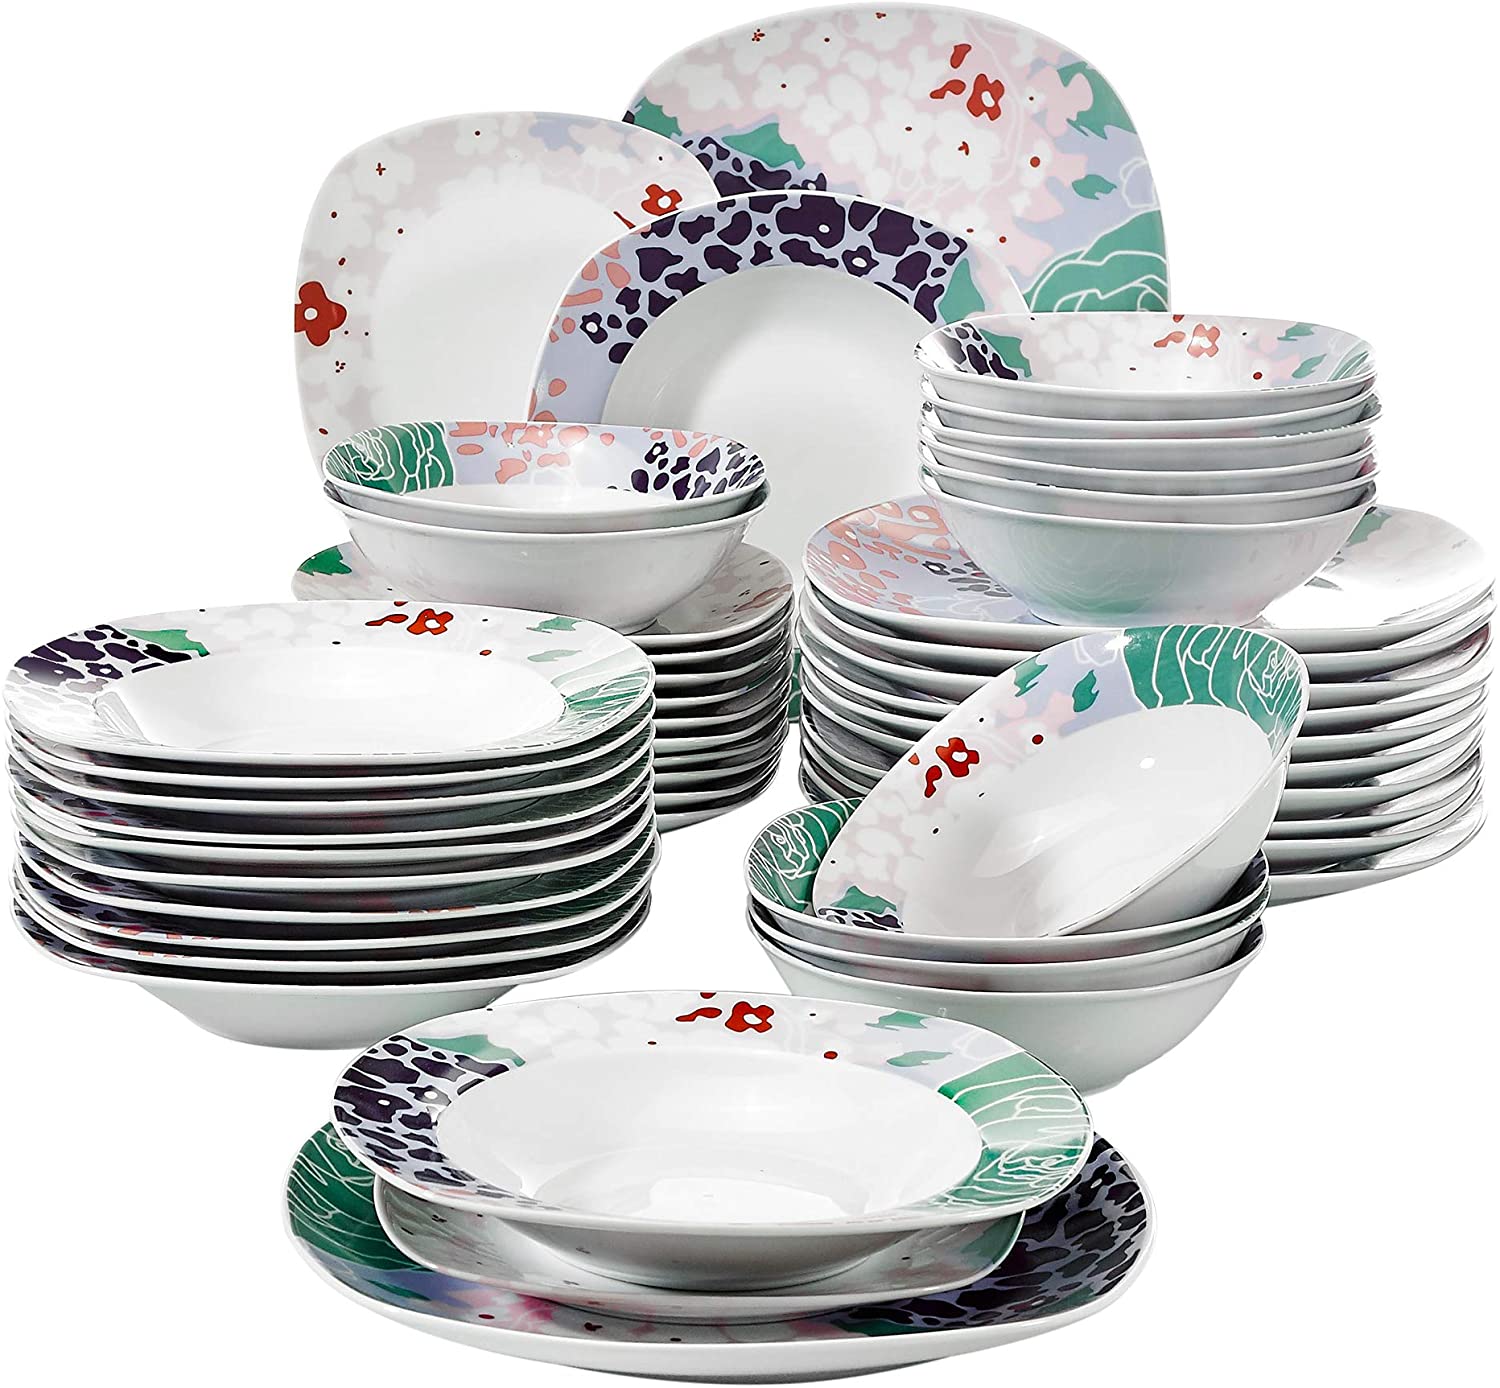 Veweet Olina Porcelain Dinner Set 30 Pieces / 60 Pieces Dinner Service Including Coffee Cups 175 ml, Saucer, Dessert Plate, Dinner Plate and Soup Plate, for 6/12 People